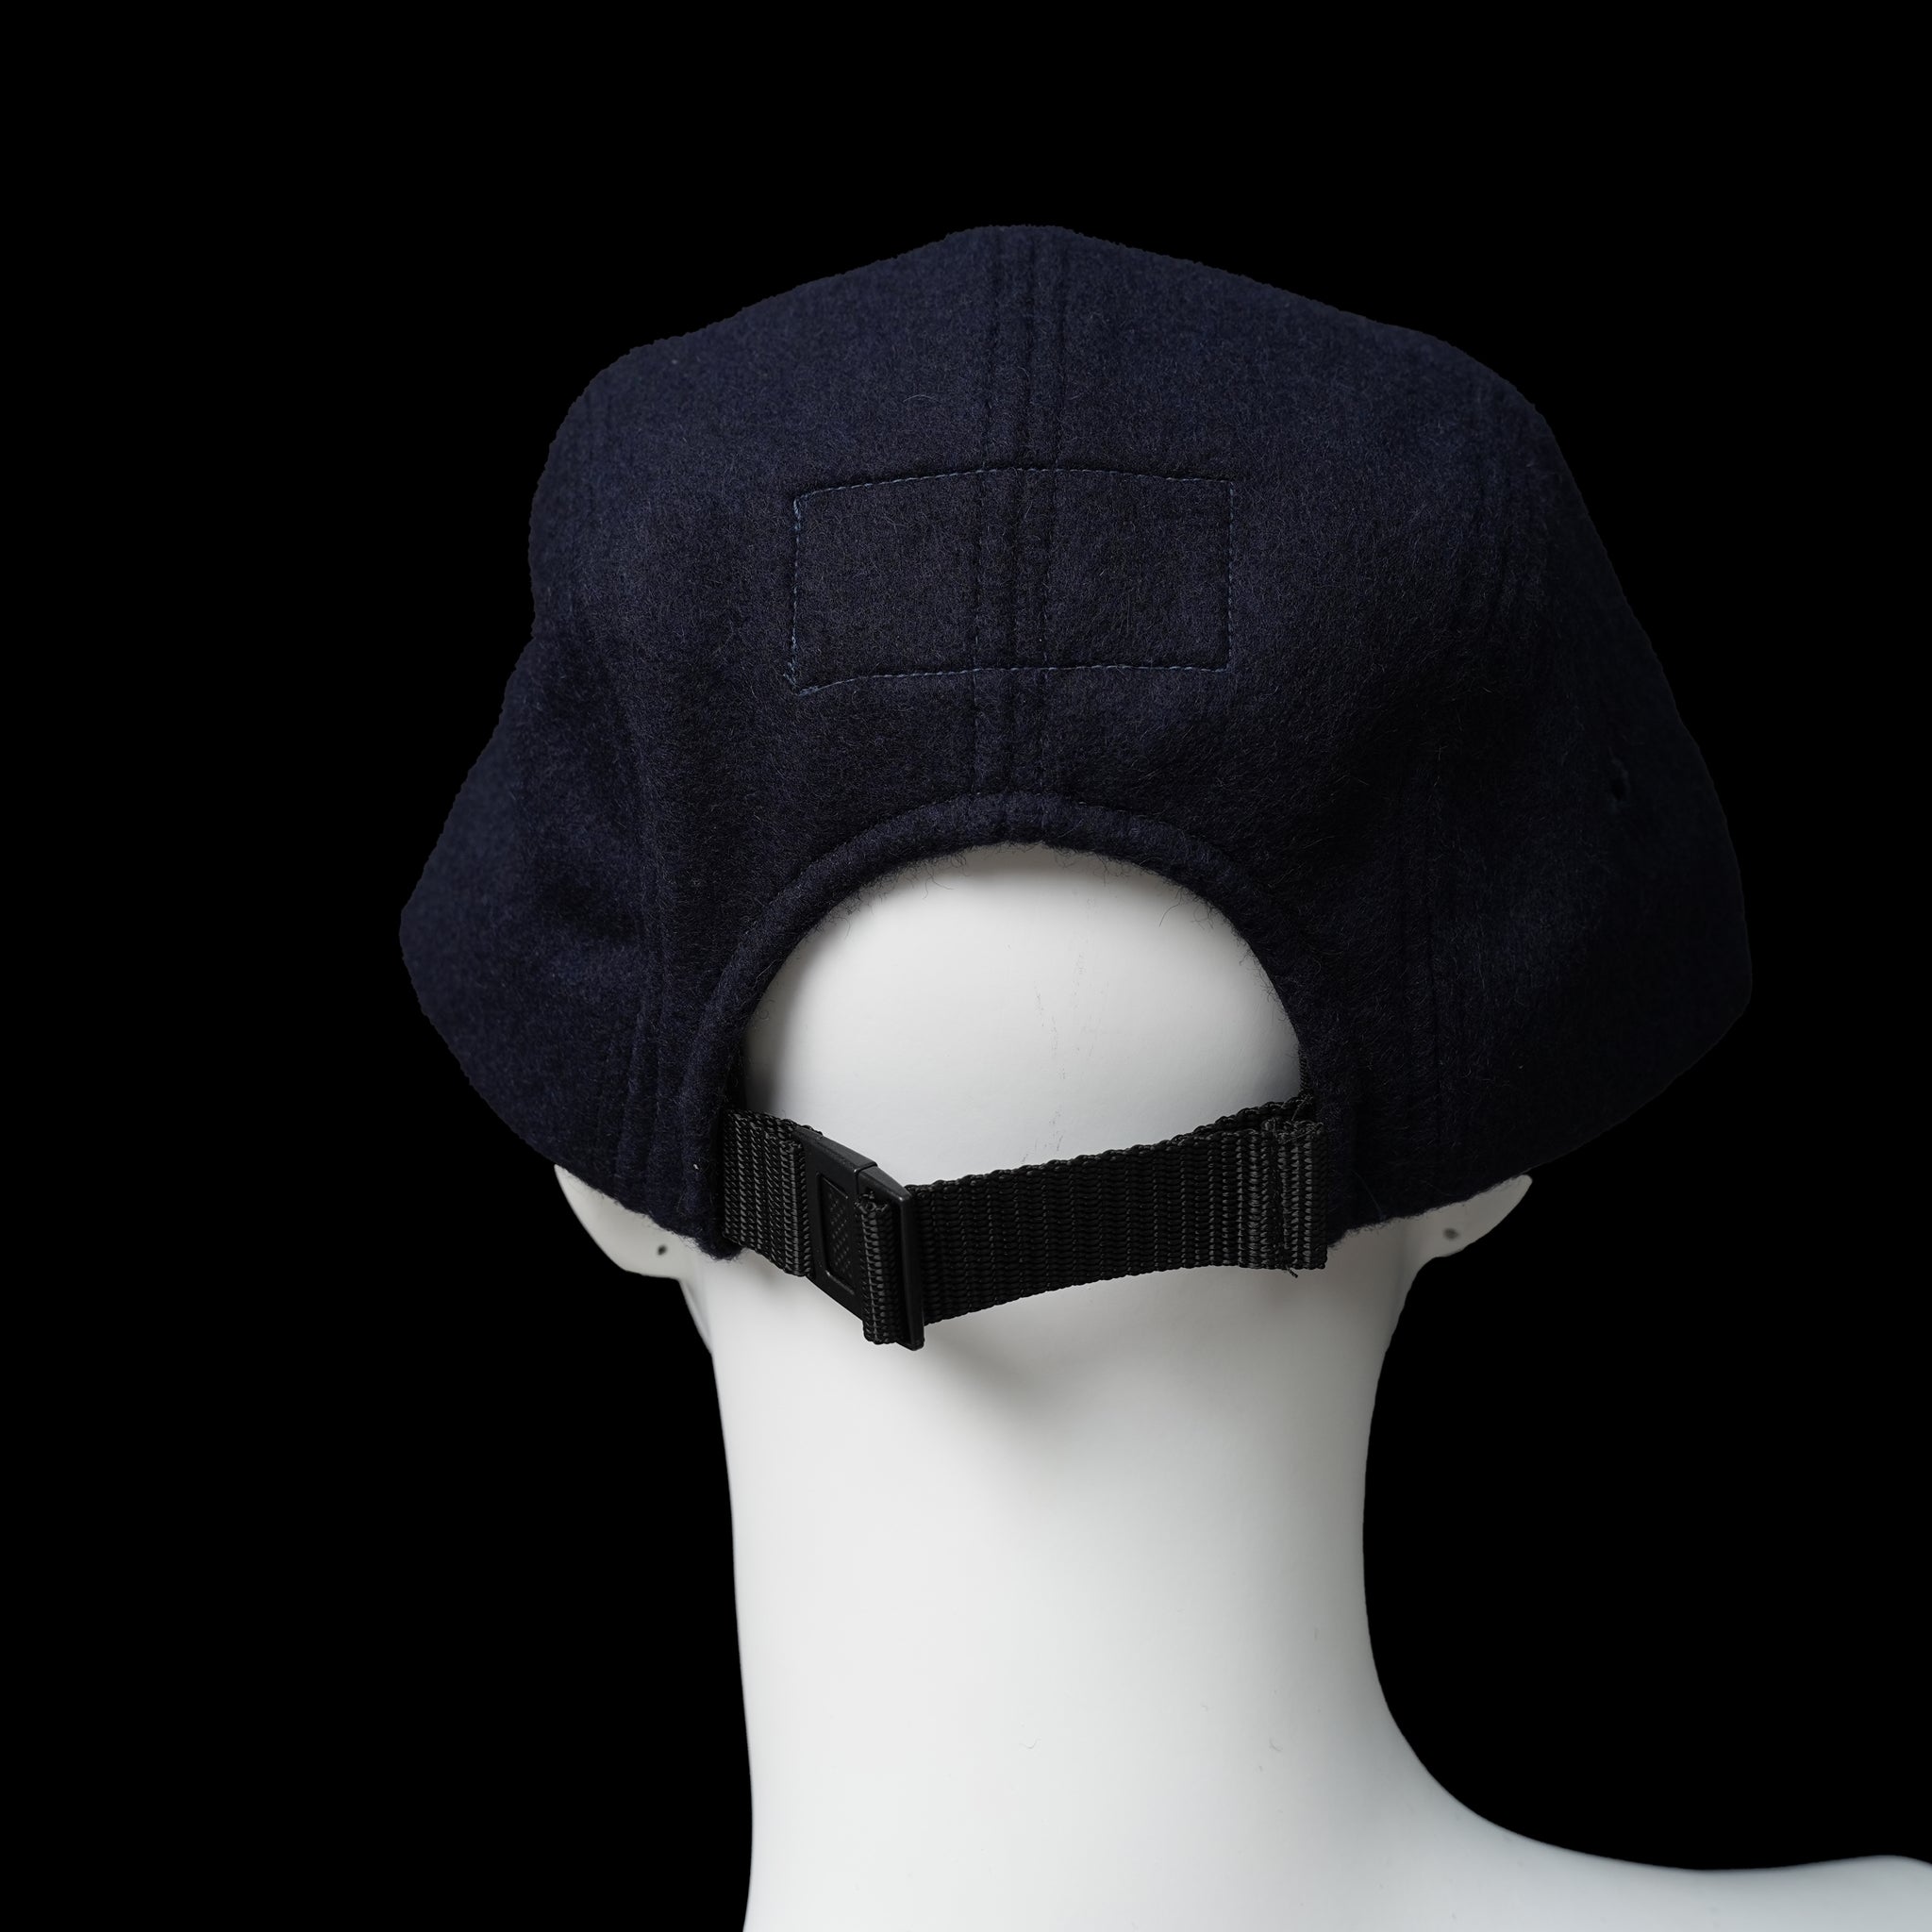 No:UN-022_AW23 | Name:UNTRACE x IDSL EASY TIME 4 PANEL CAP | Color:Dark Navy【UNTRACE_アントレース】